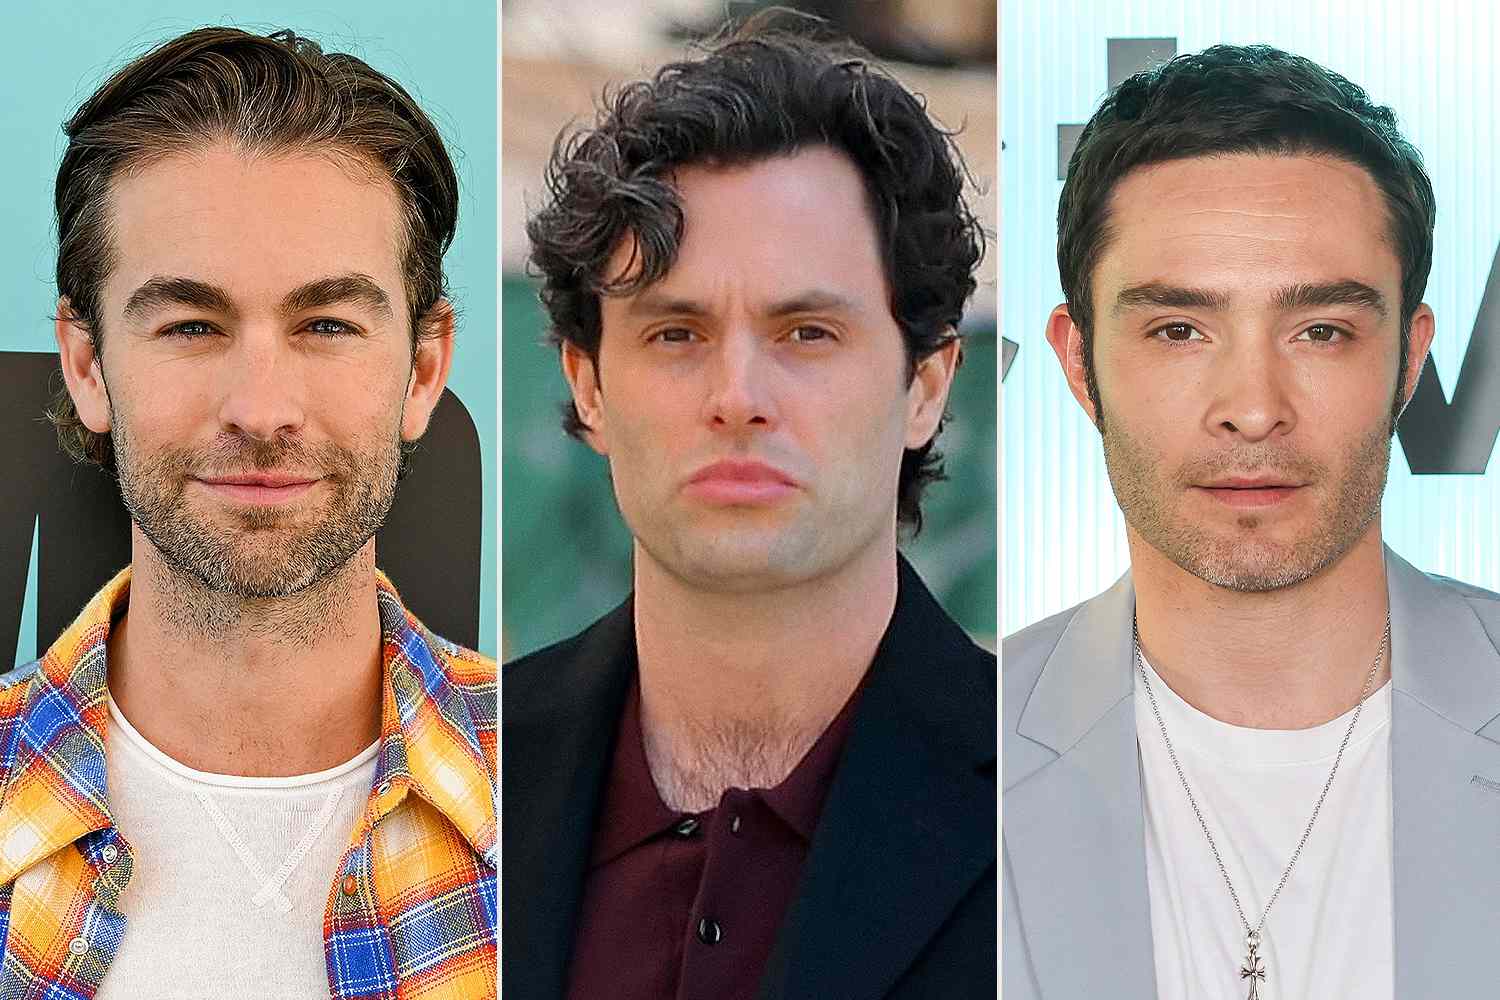 Chace Crawford Says 'Gossip Girl' Costars Penn Badgley and Ed Westwick 'Would Fit Right in' on 'The Boys' (Exclusive)